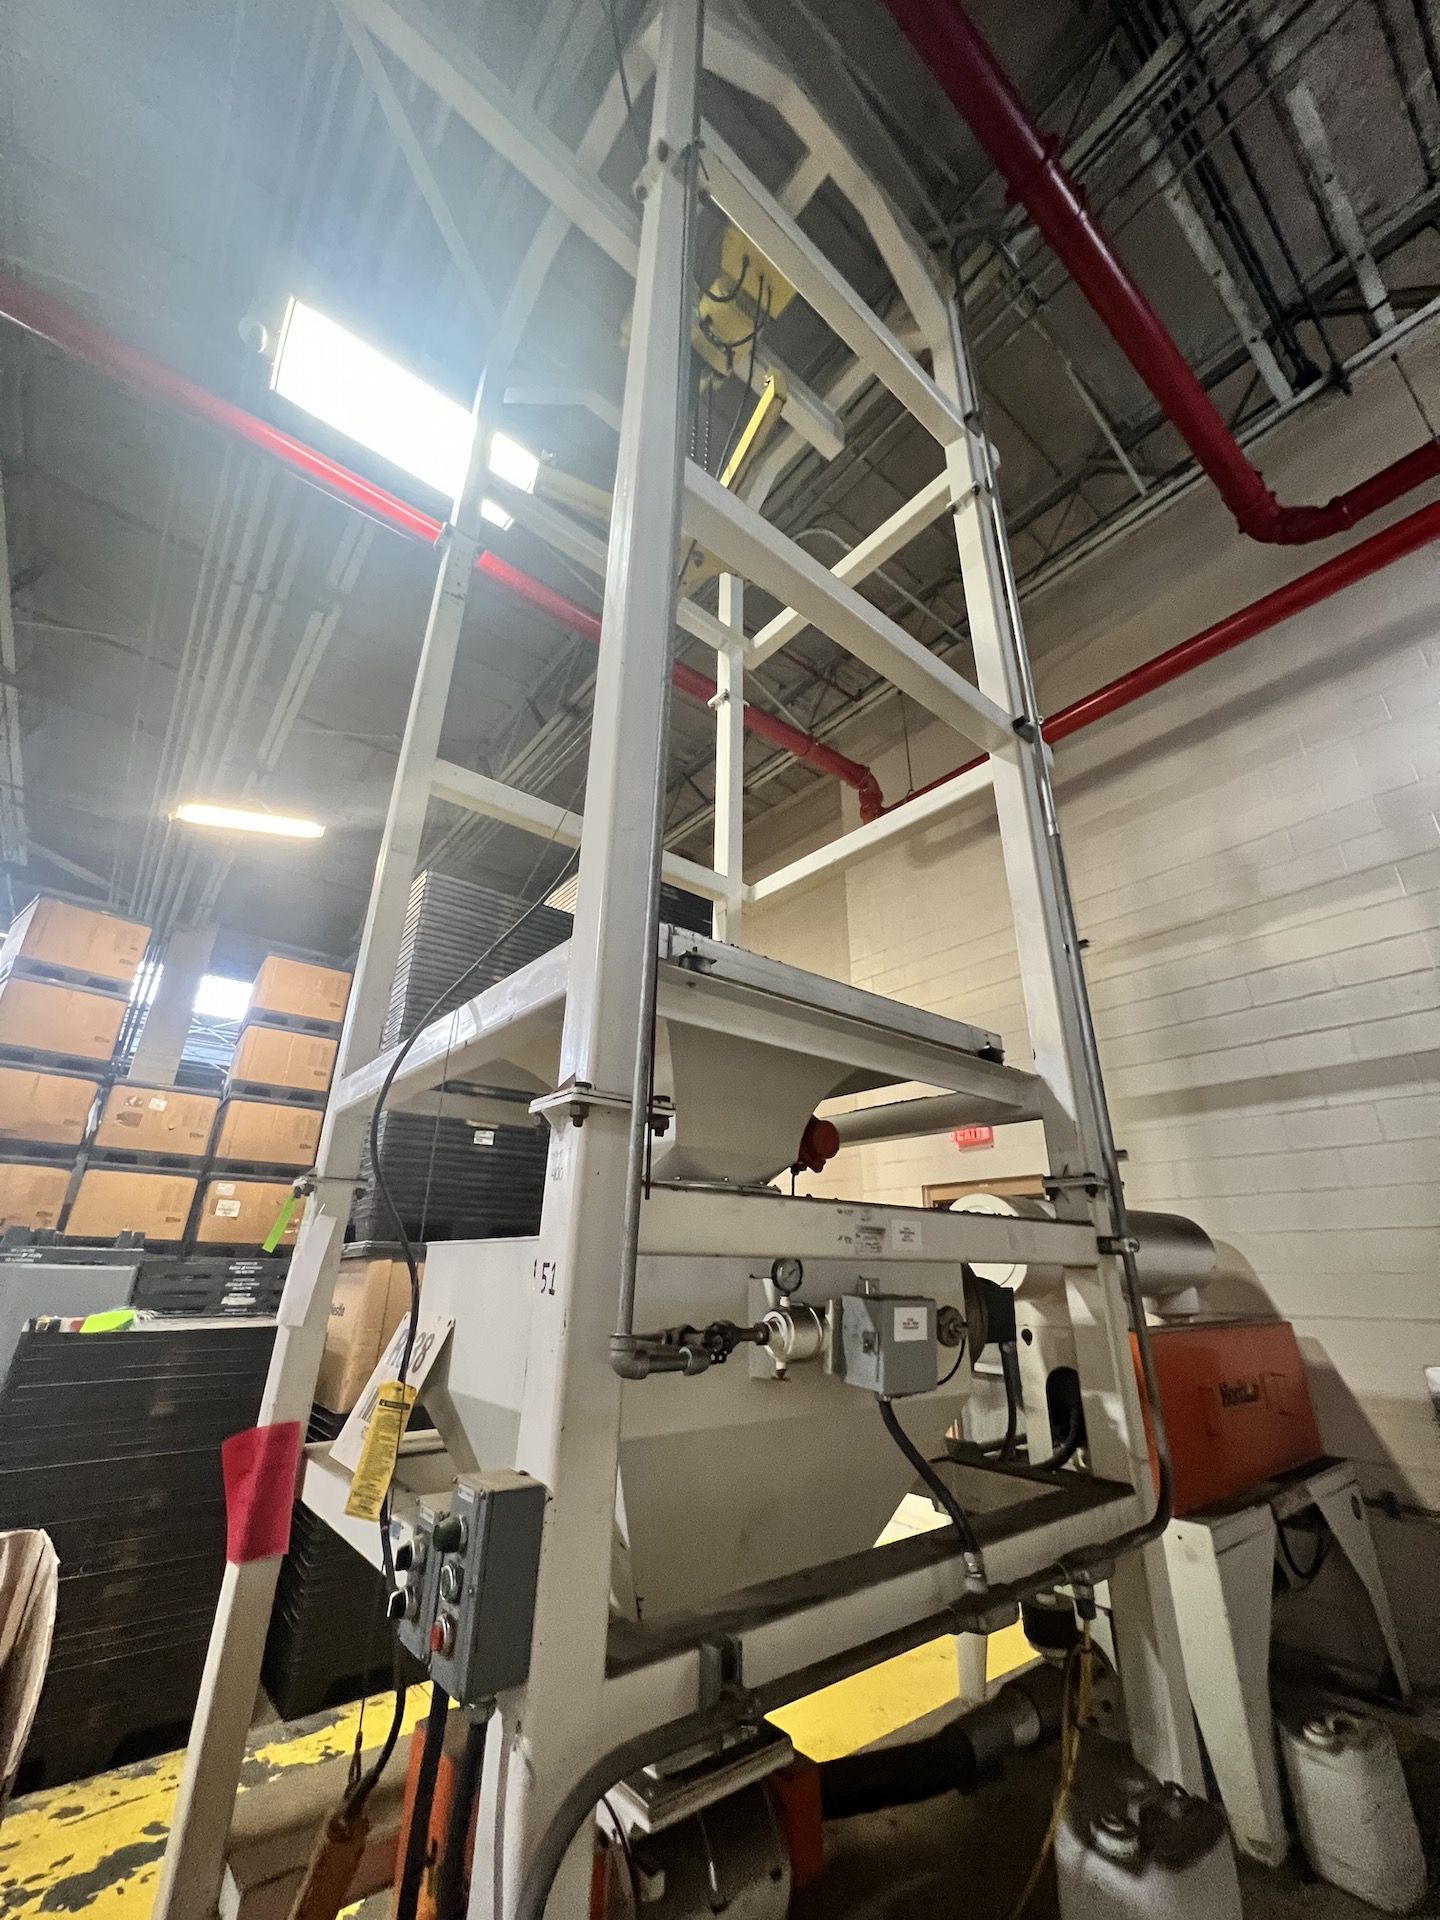 HORIZON SYSTEMS BULK BAG DISCHARGER / SUPERSAC UNLOADING SYSTEM, INCLUDES ROTARY AIRLOCK VALVE, - Image 14 of 24